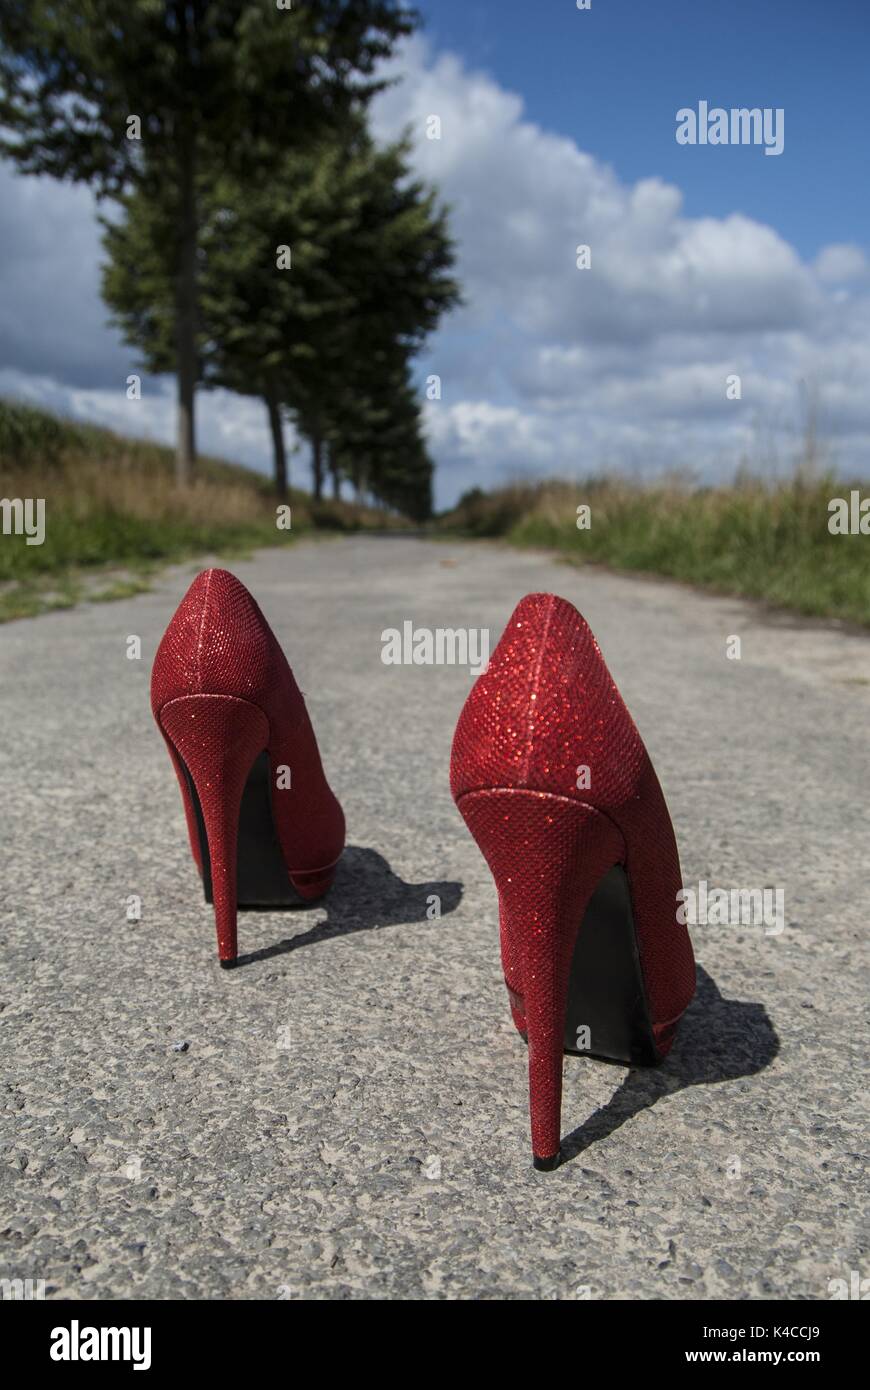 Shoes, Pumps, High Heels Stock Photo